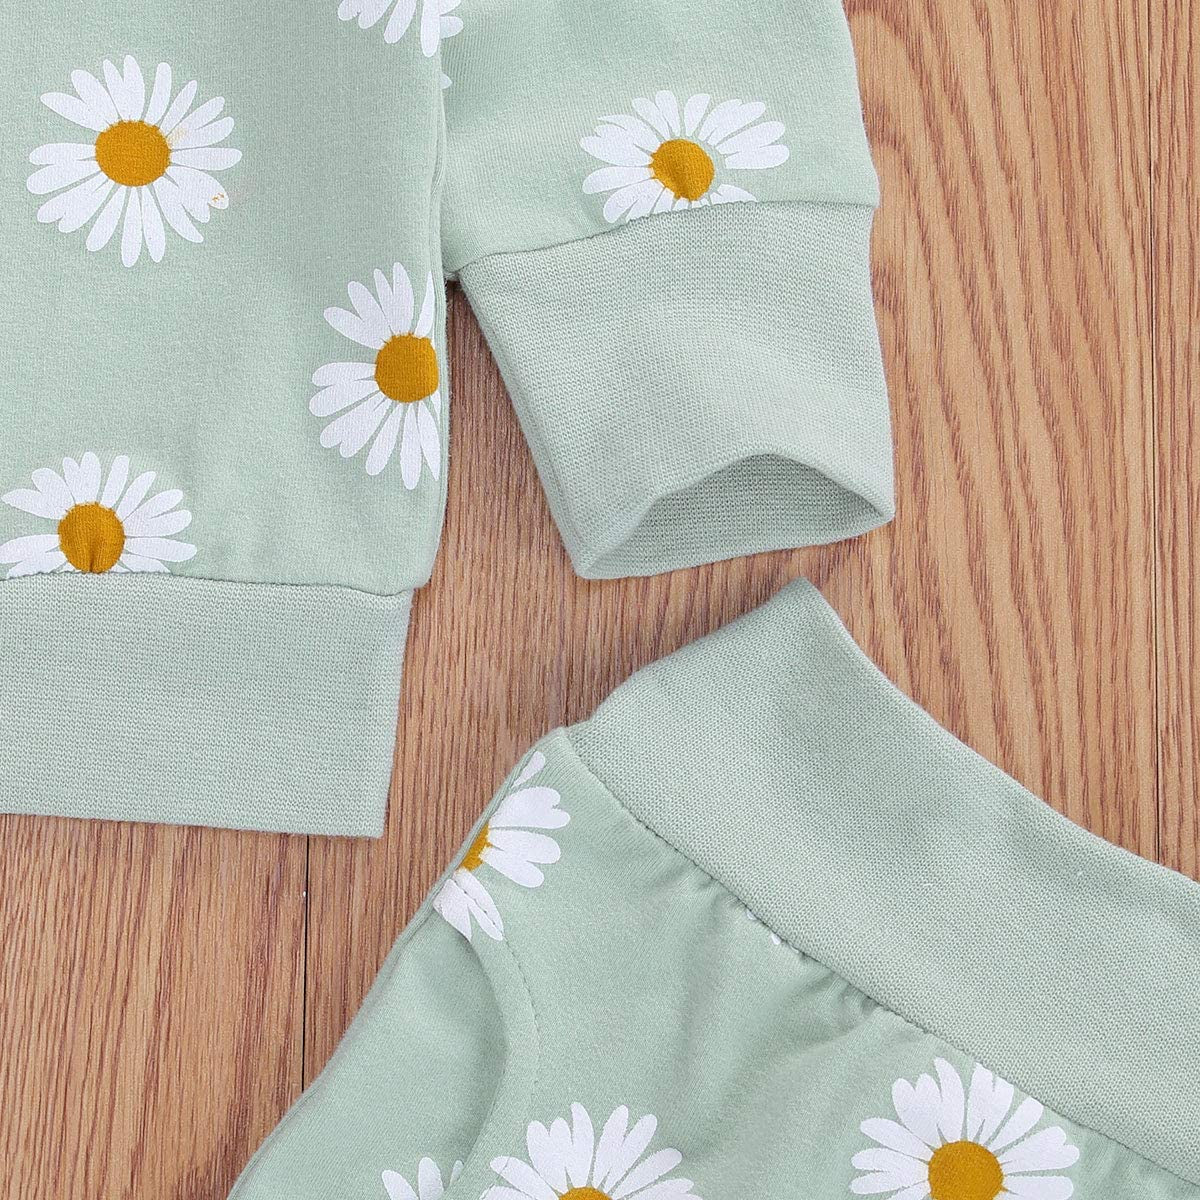 0-24M Flower Newborn Infant Baby Girl Clothes Set Long Sleeve Sweatshirts Tops Pants Outfits